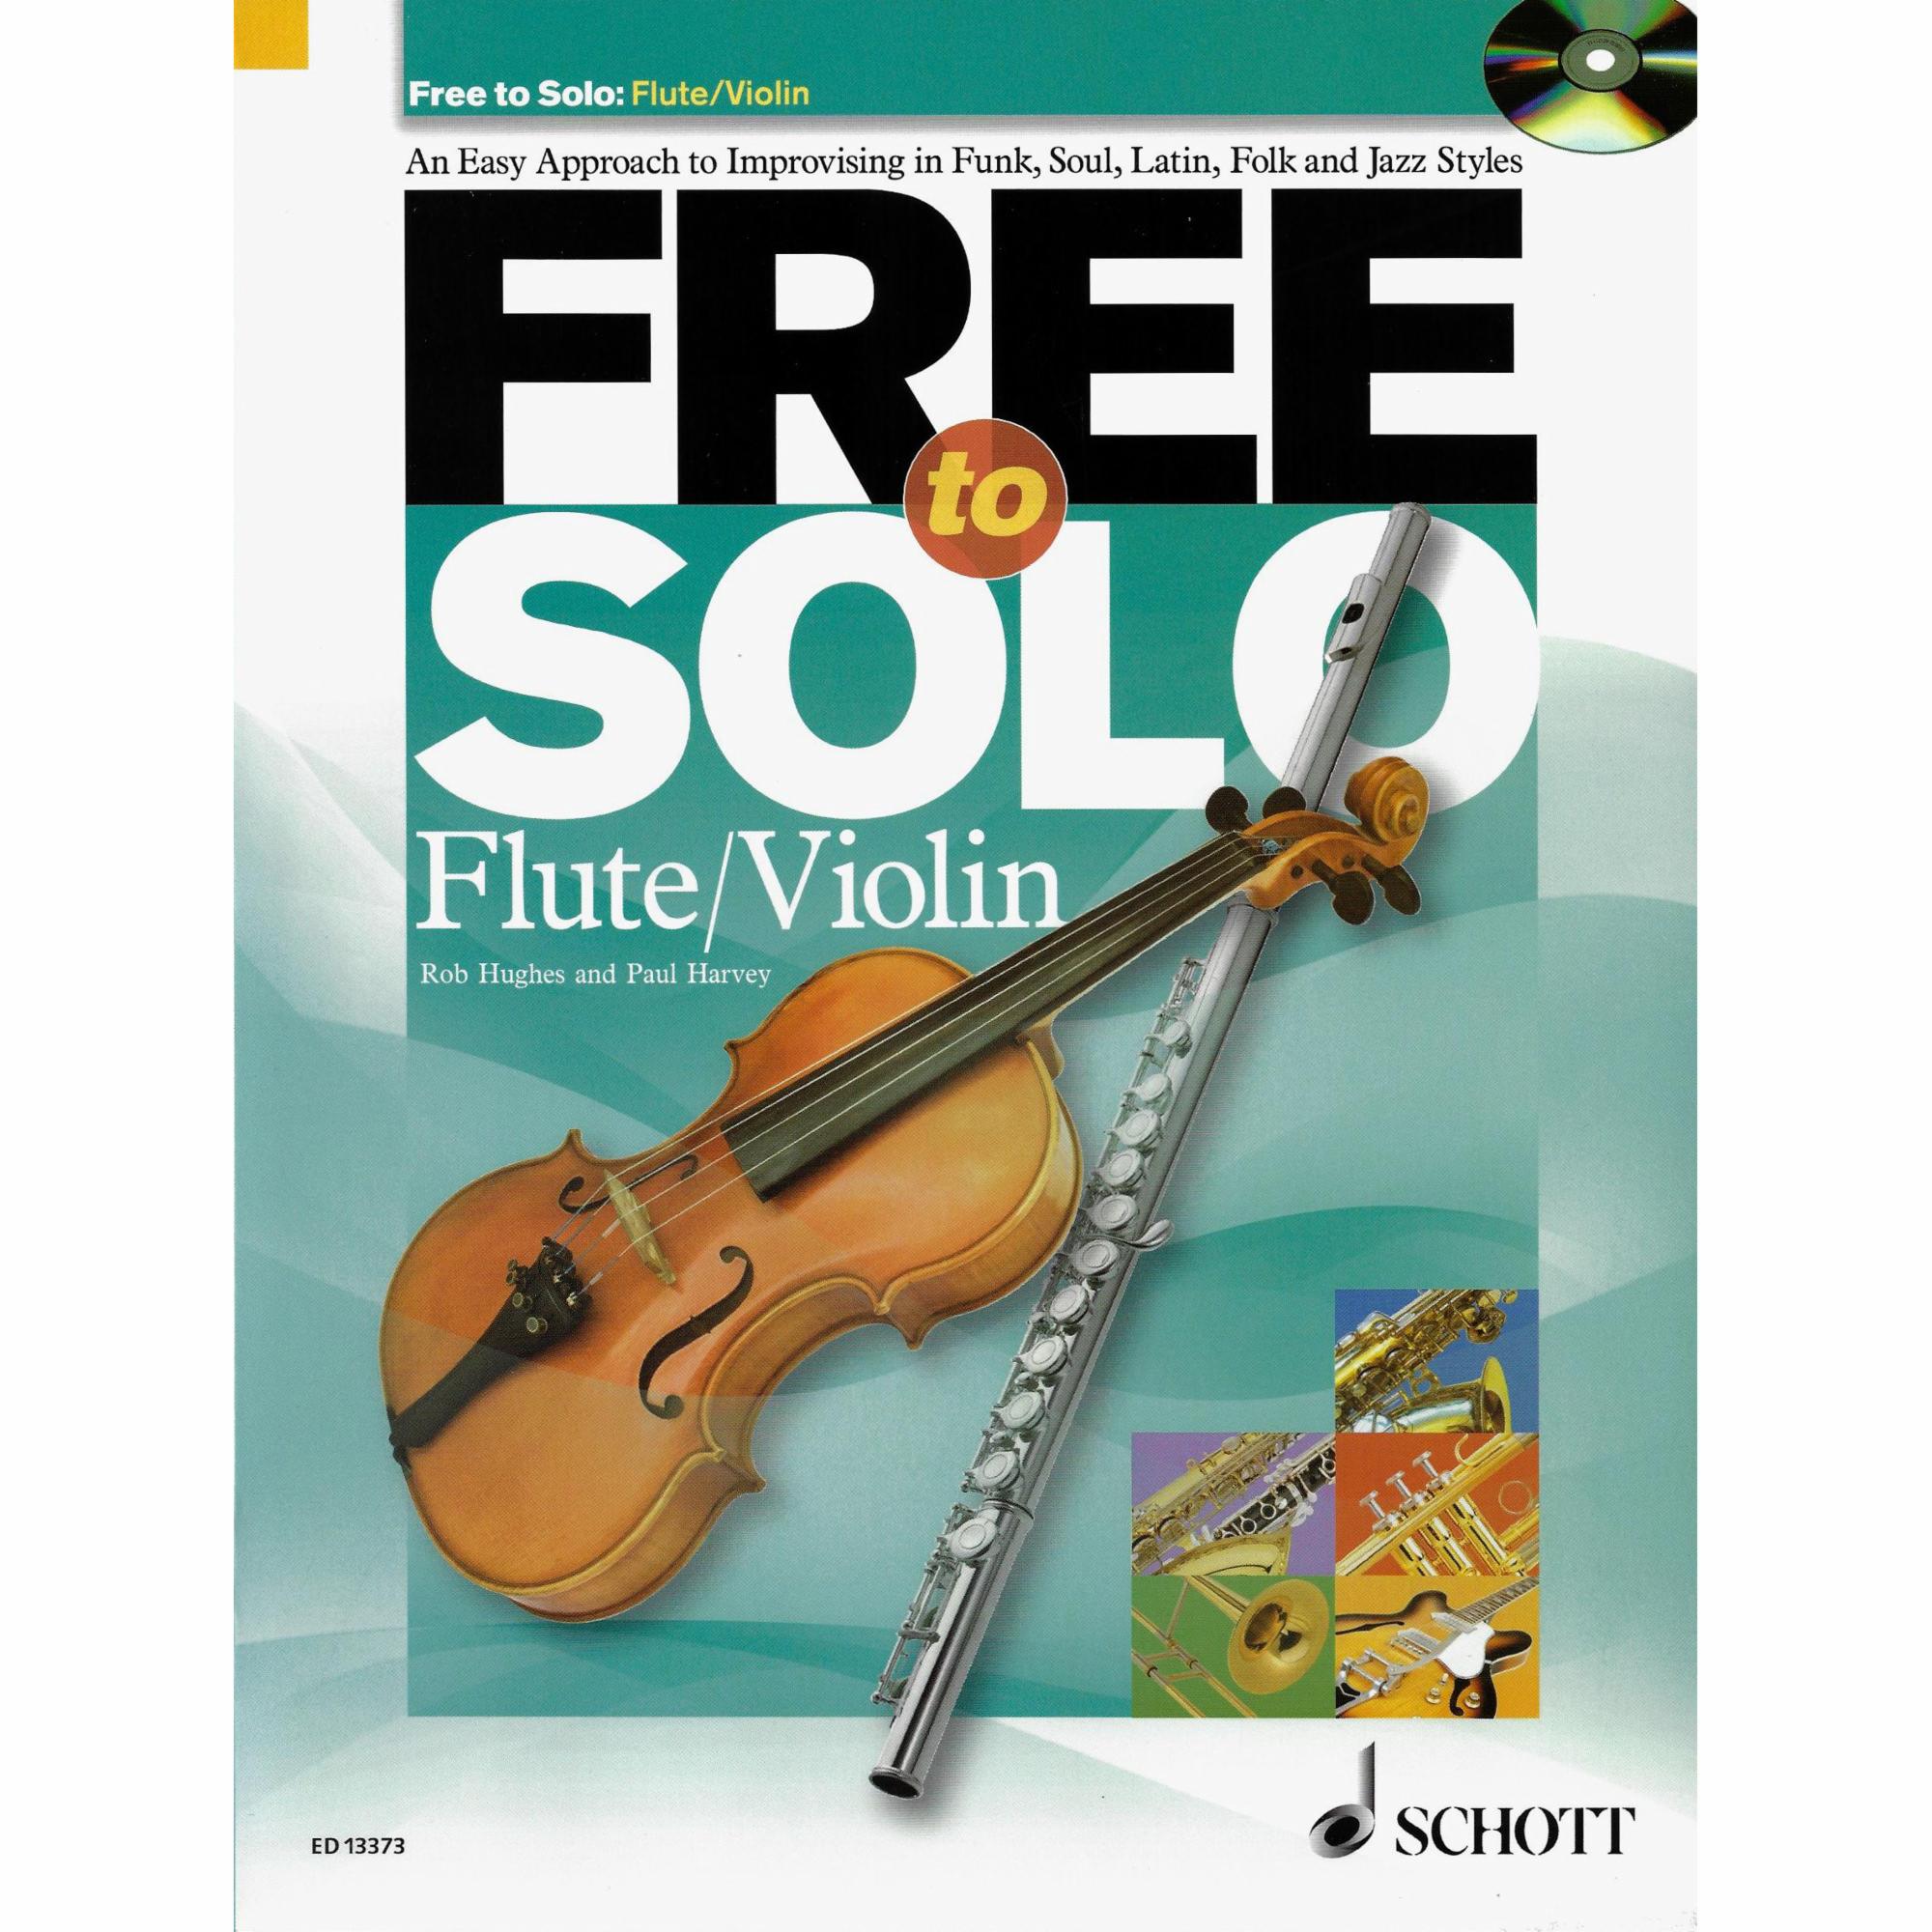 Free to Solo for Violin